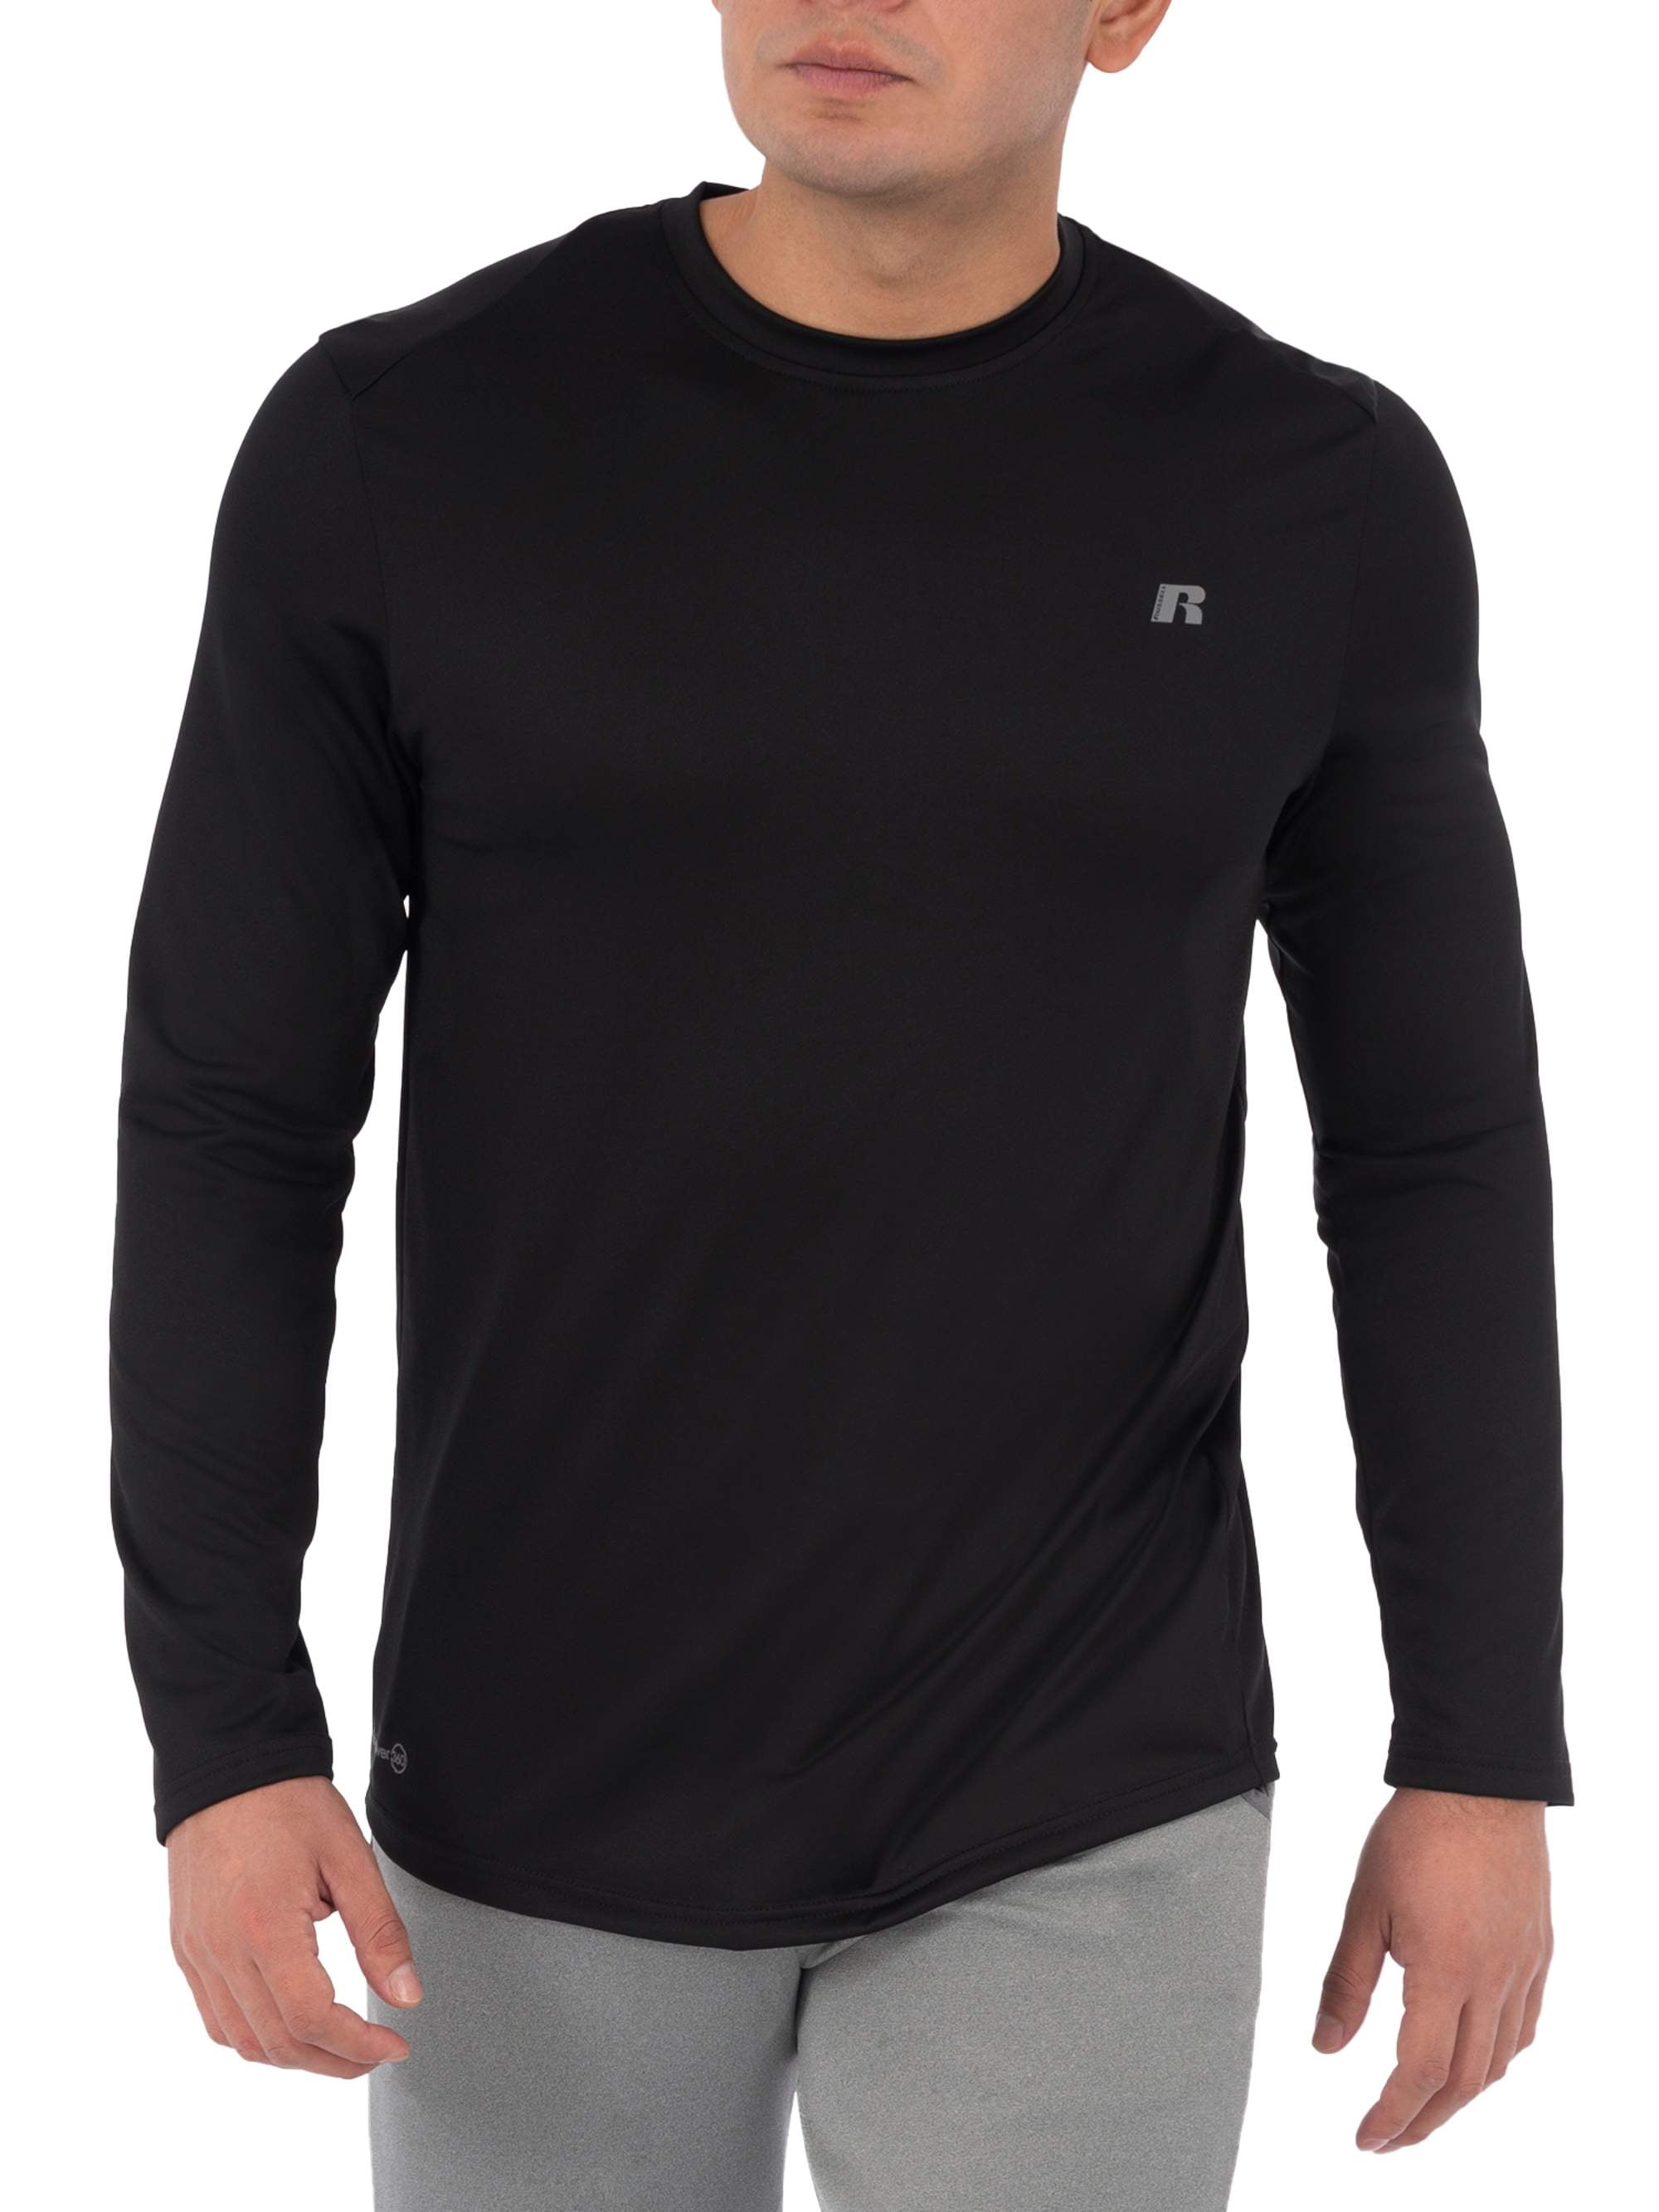 fitted long sleeve athletic shirts